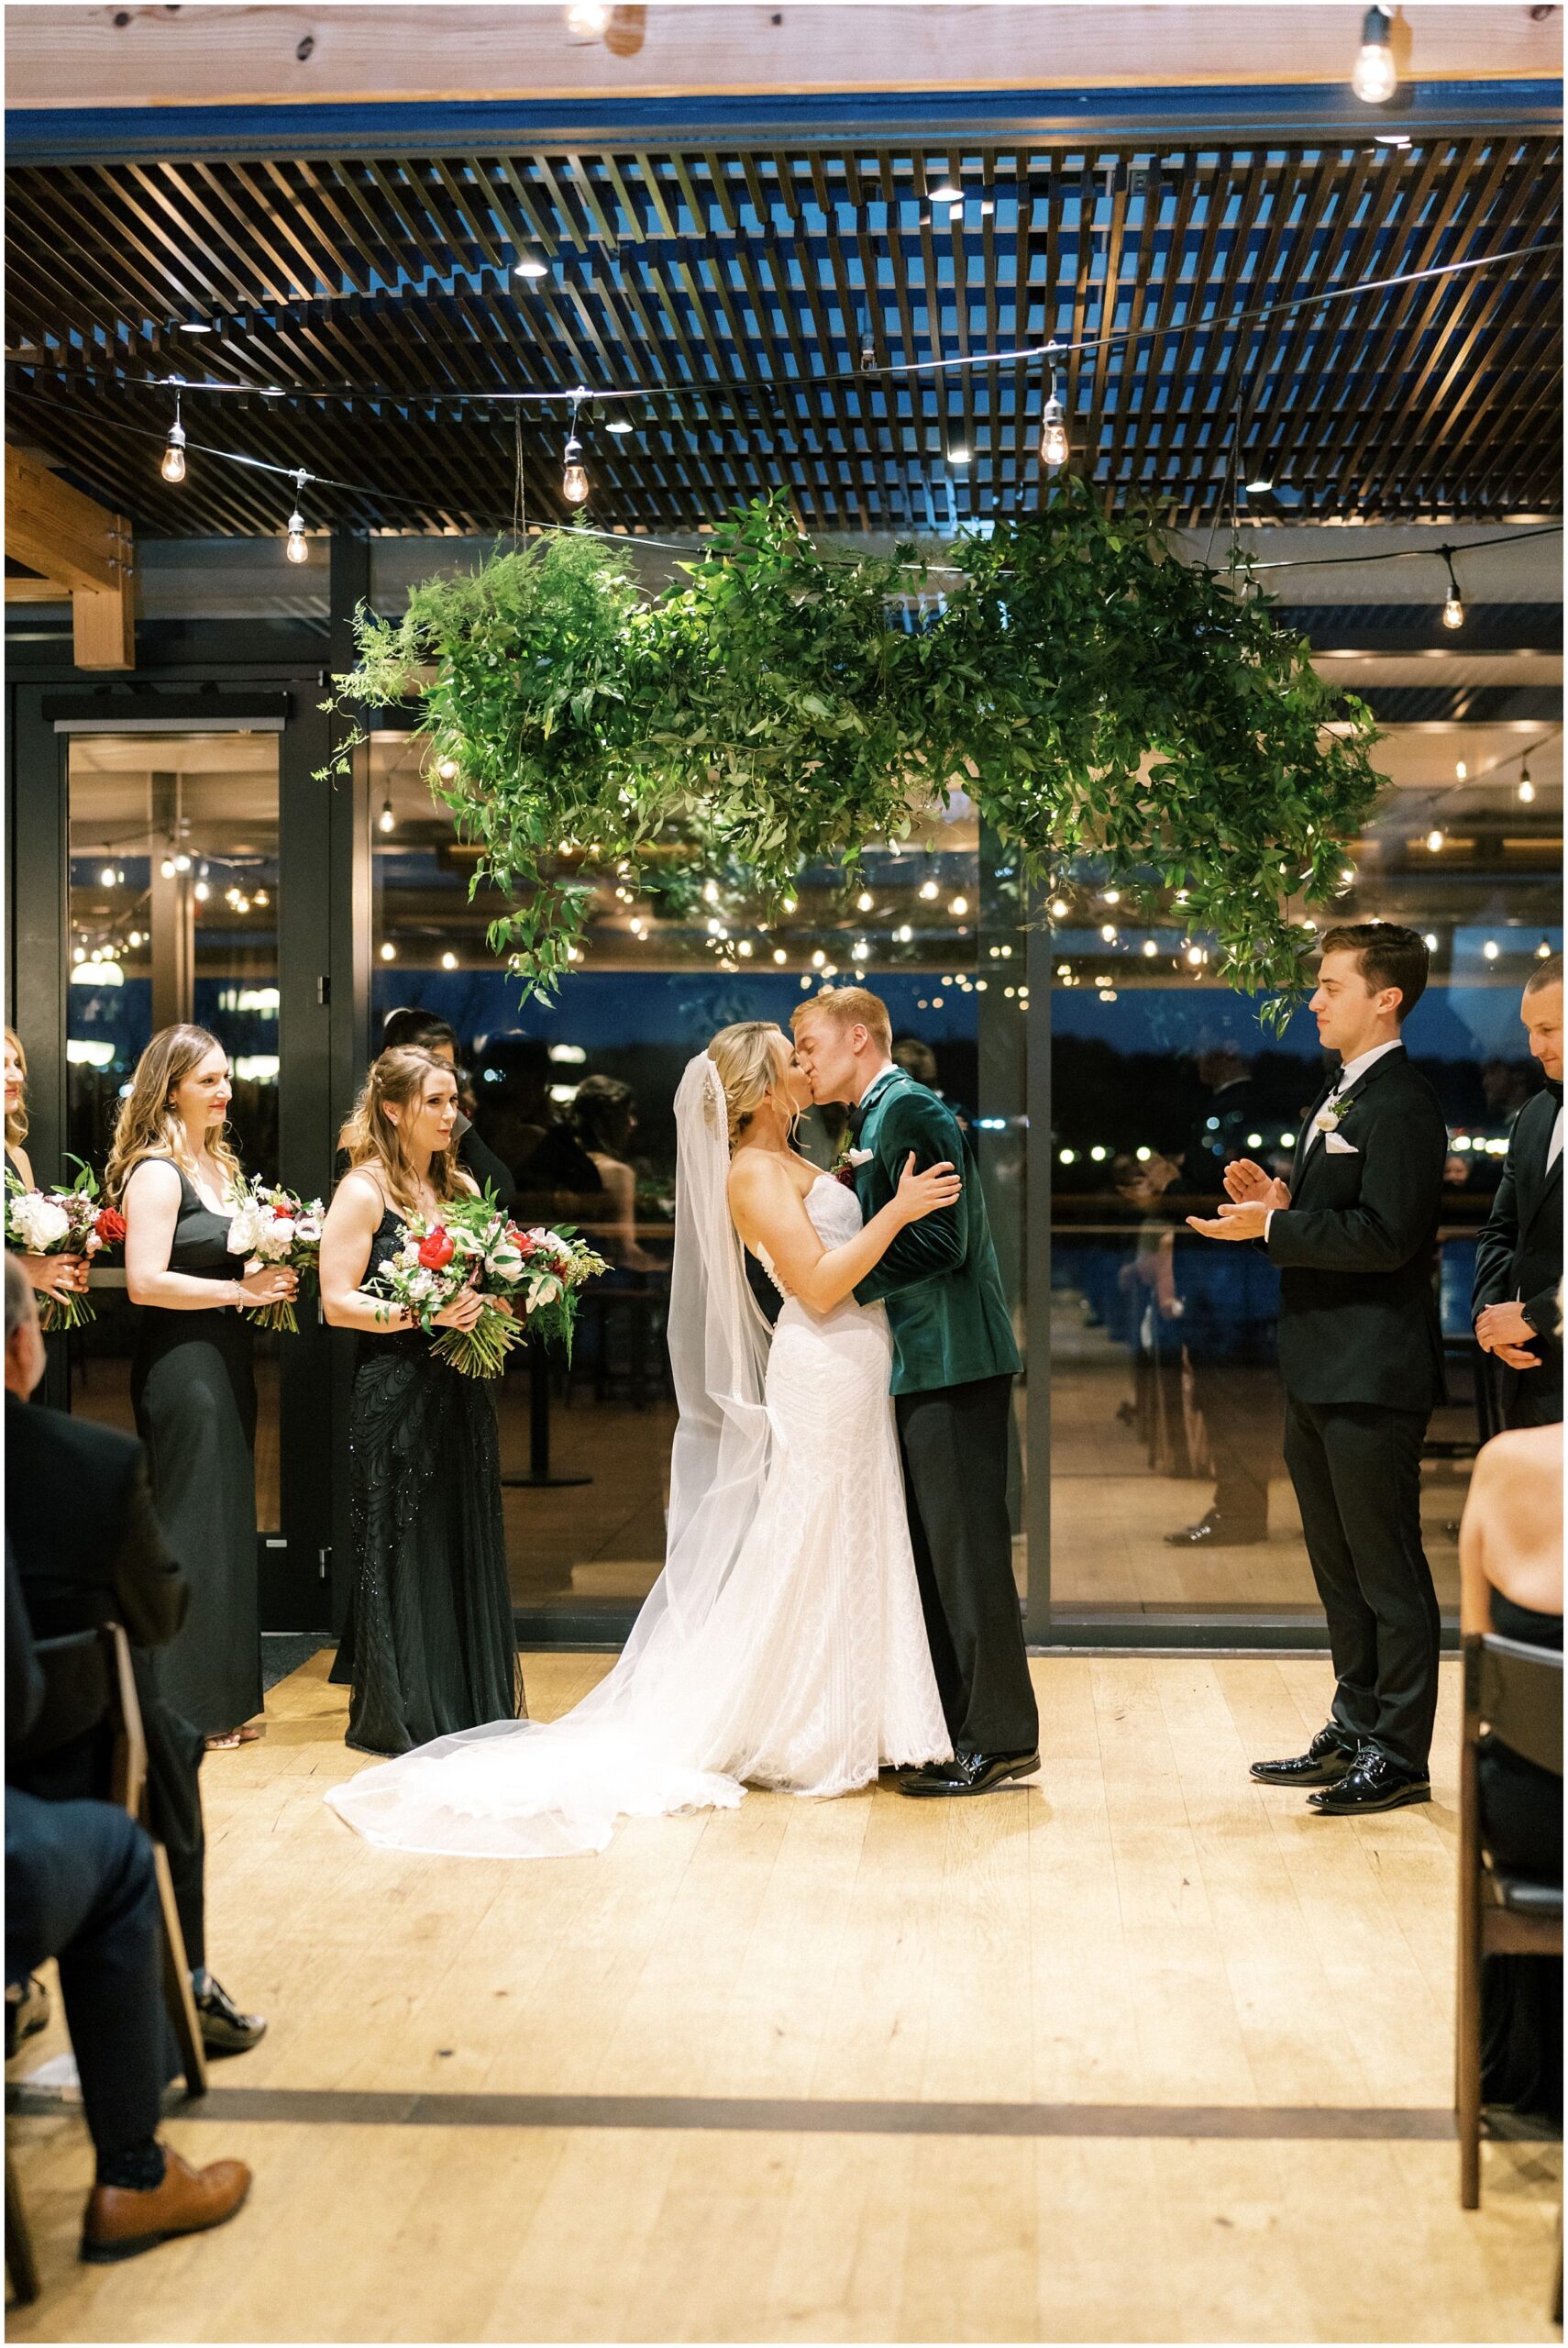 Winter wedding at District Winery in Washington DC